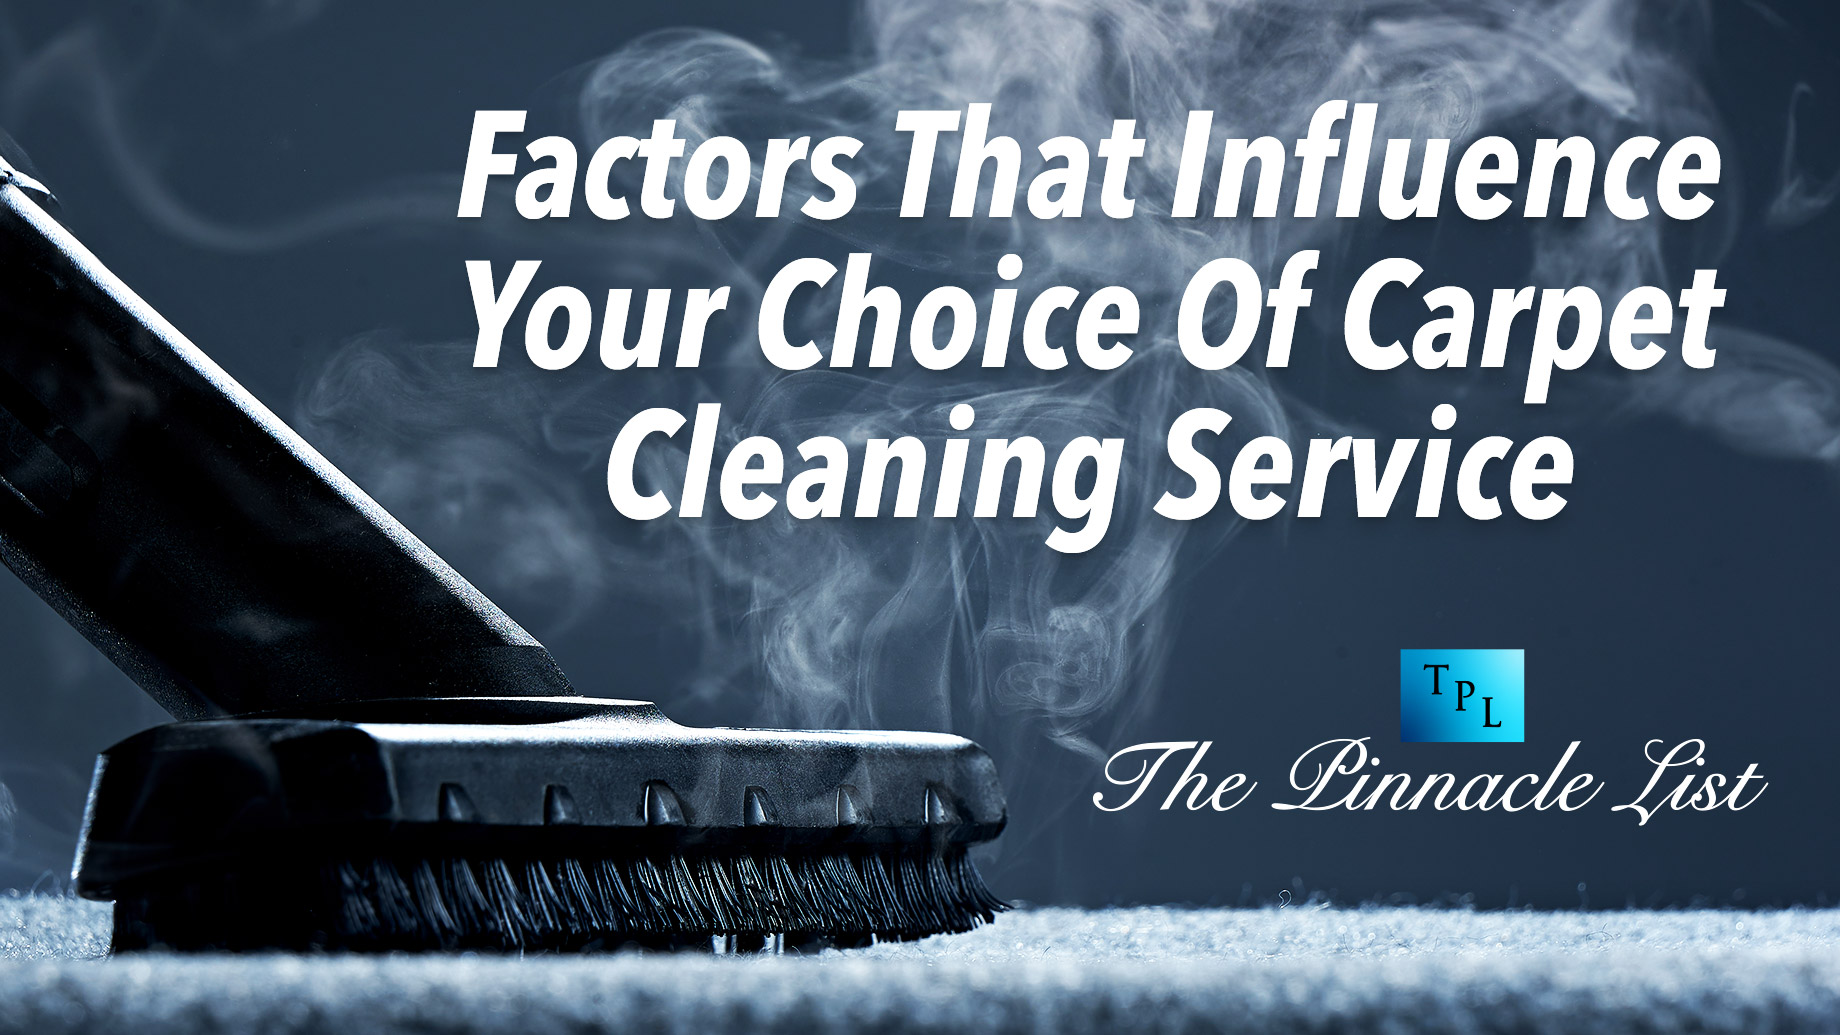 Factors That Influence Your Choice Of Carpet Cleaning Service